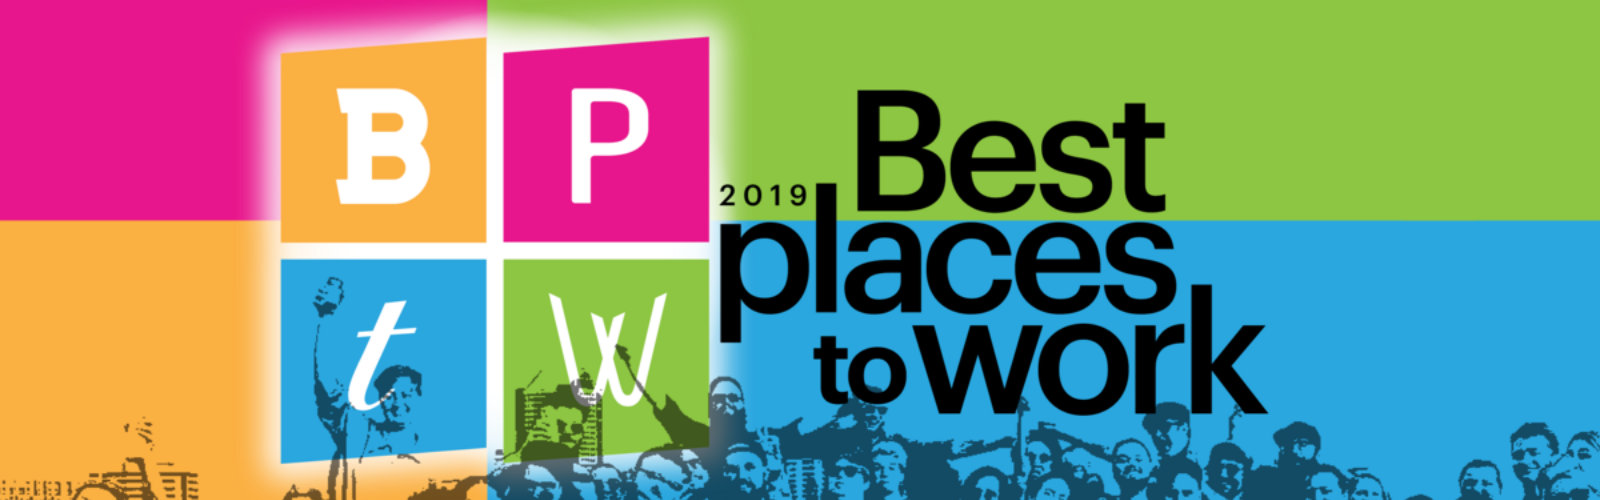 Columbus Business First Best Places to Work 2019